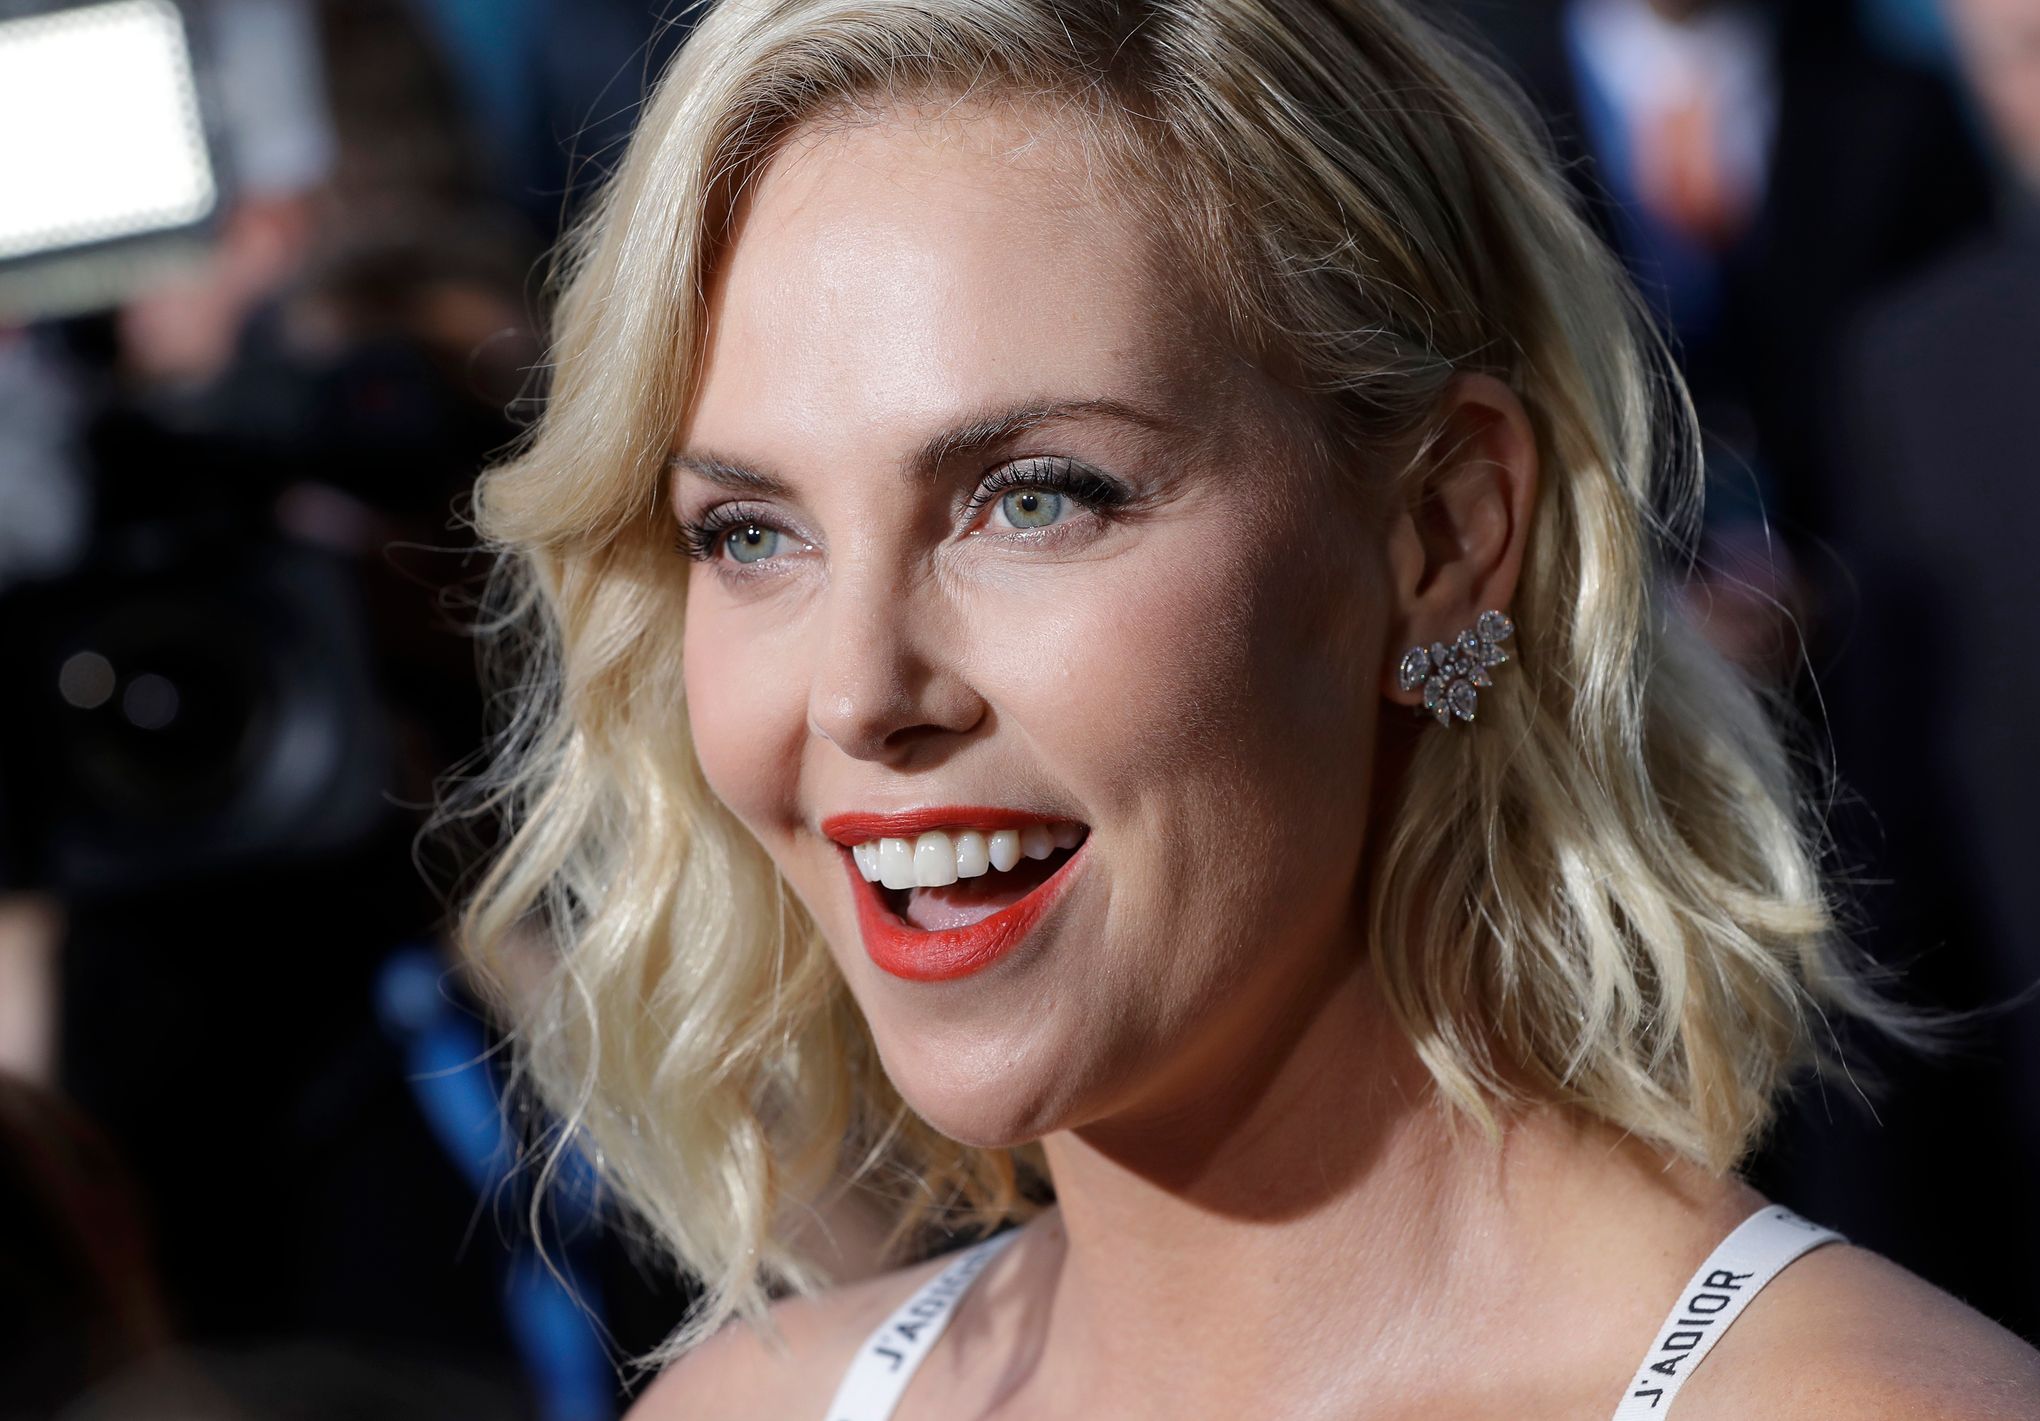 Charlize Theron celebrates her Oscar nomination with some retail